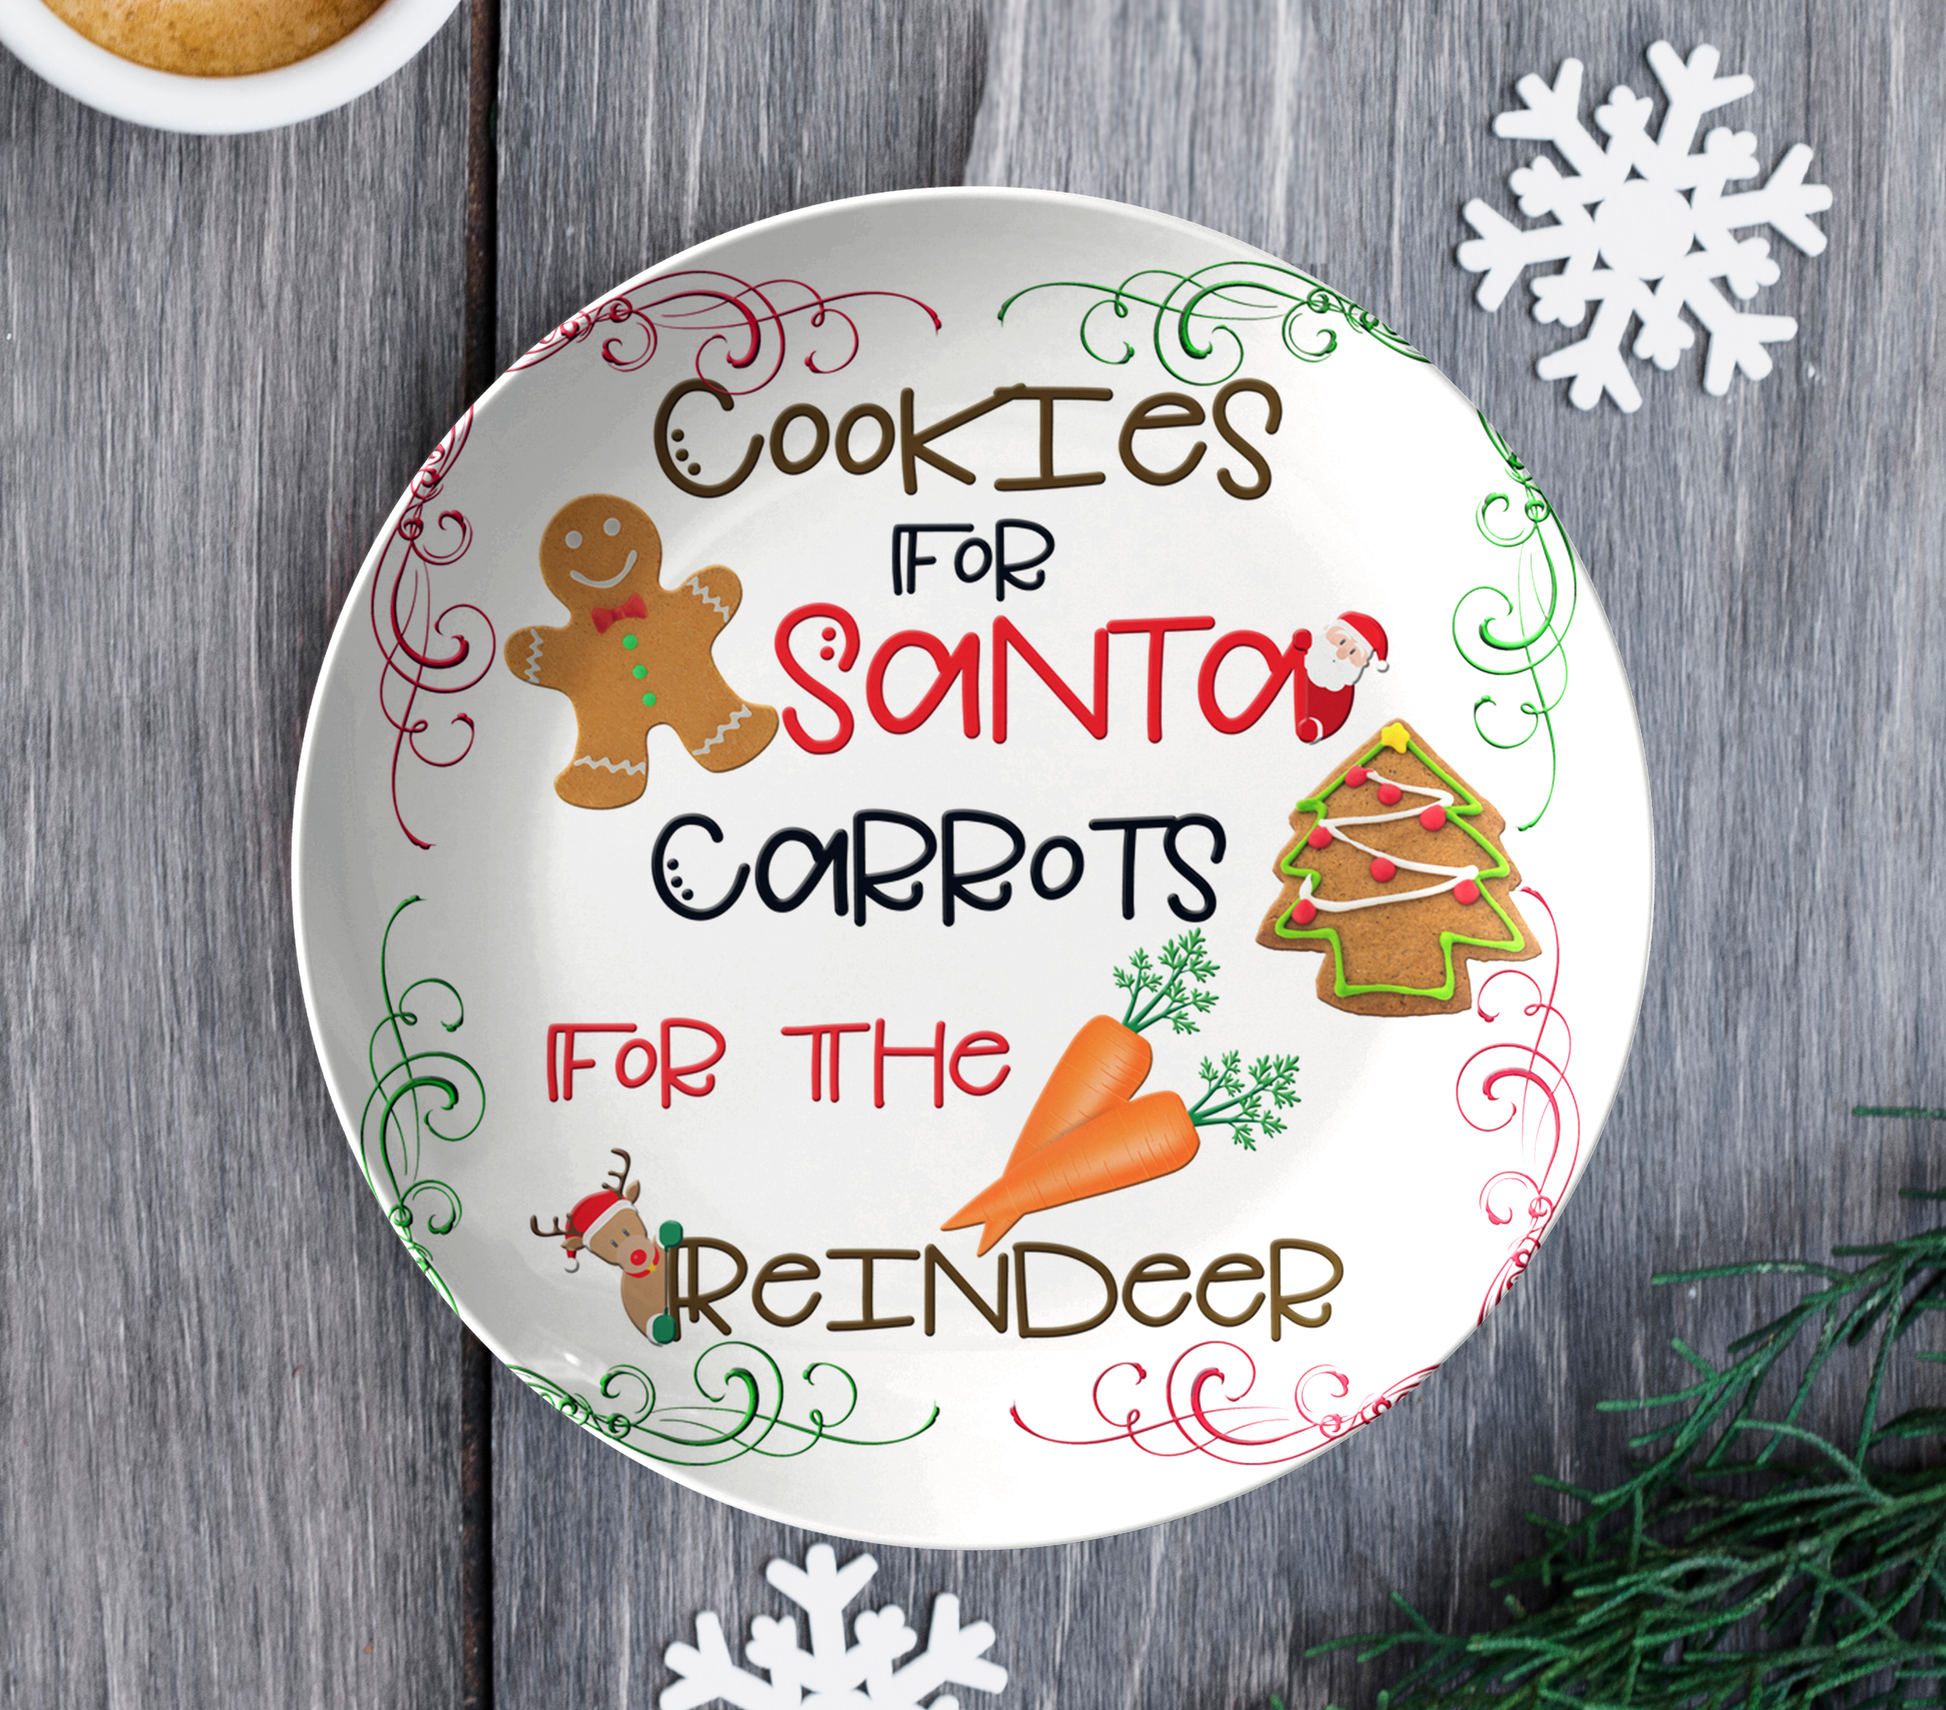 Cookies For Santa Carrots For The Reindeer | Leave Cookies For Santa | Santa Cookie Plate - Dinnerware